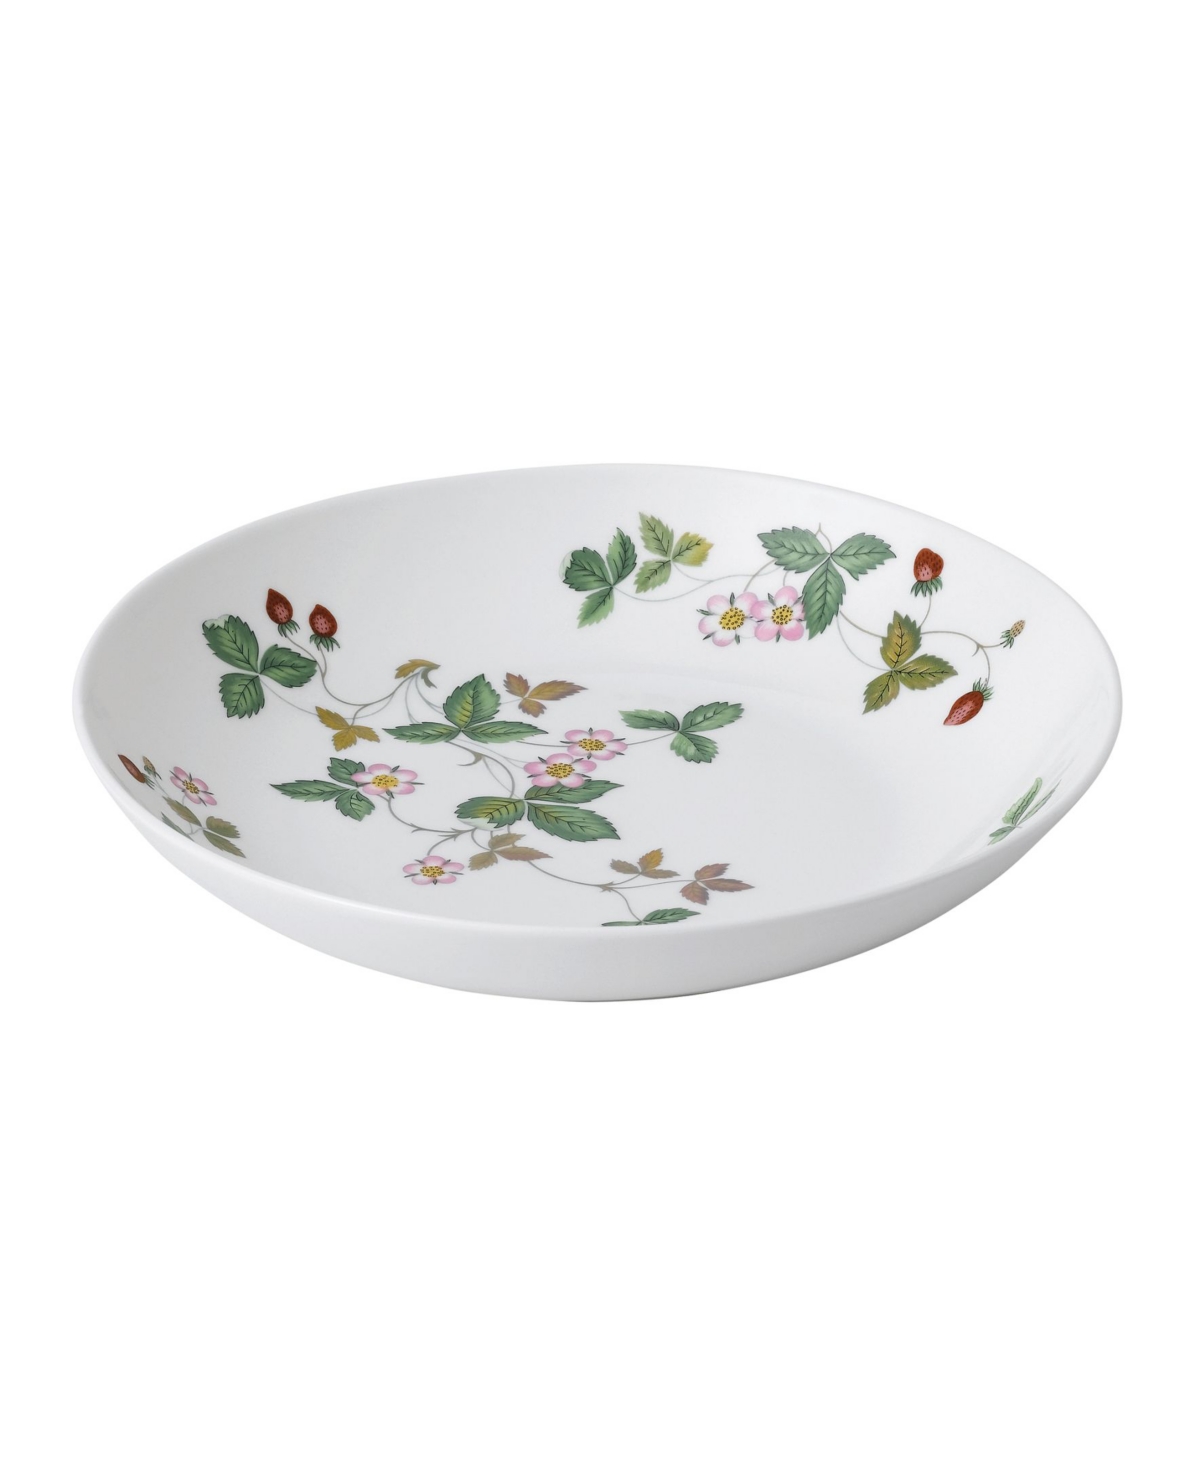 Wedgwood Wild Strawberry Coupe Bowl In Multi